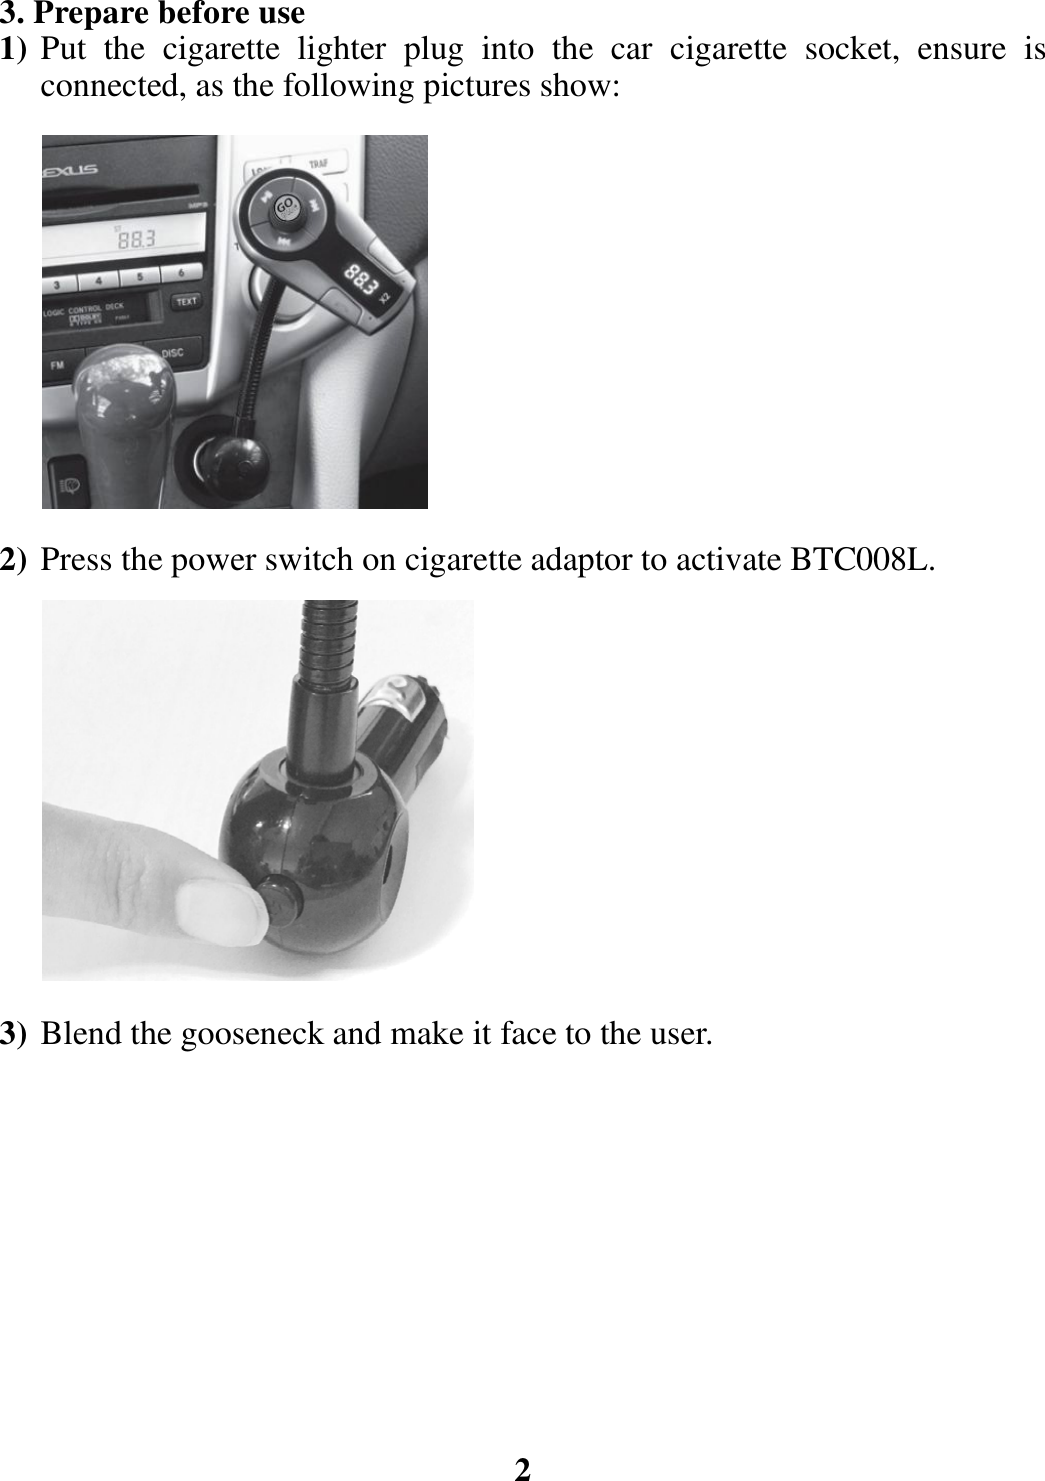 3. Prepare before use 1) Put the cigarette lighter plug into the car cigarette socket, ensure is connected, as the following pictures show:                                                   2) Press the power switch on cigarette adaptor to activate BTC008L.             3) Blend the gooseneck and make it face to the user.            2 